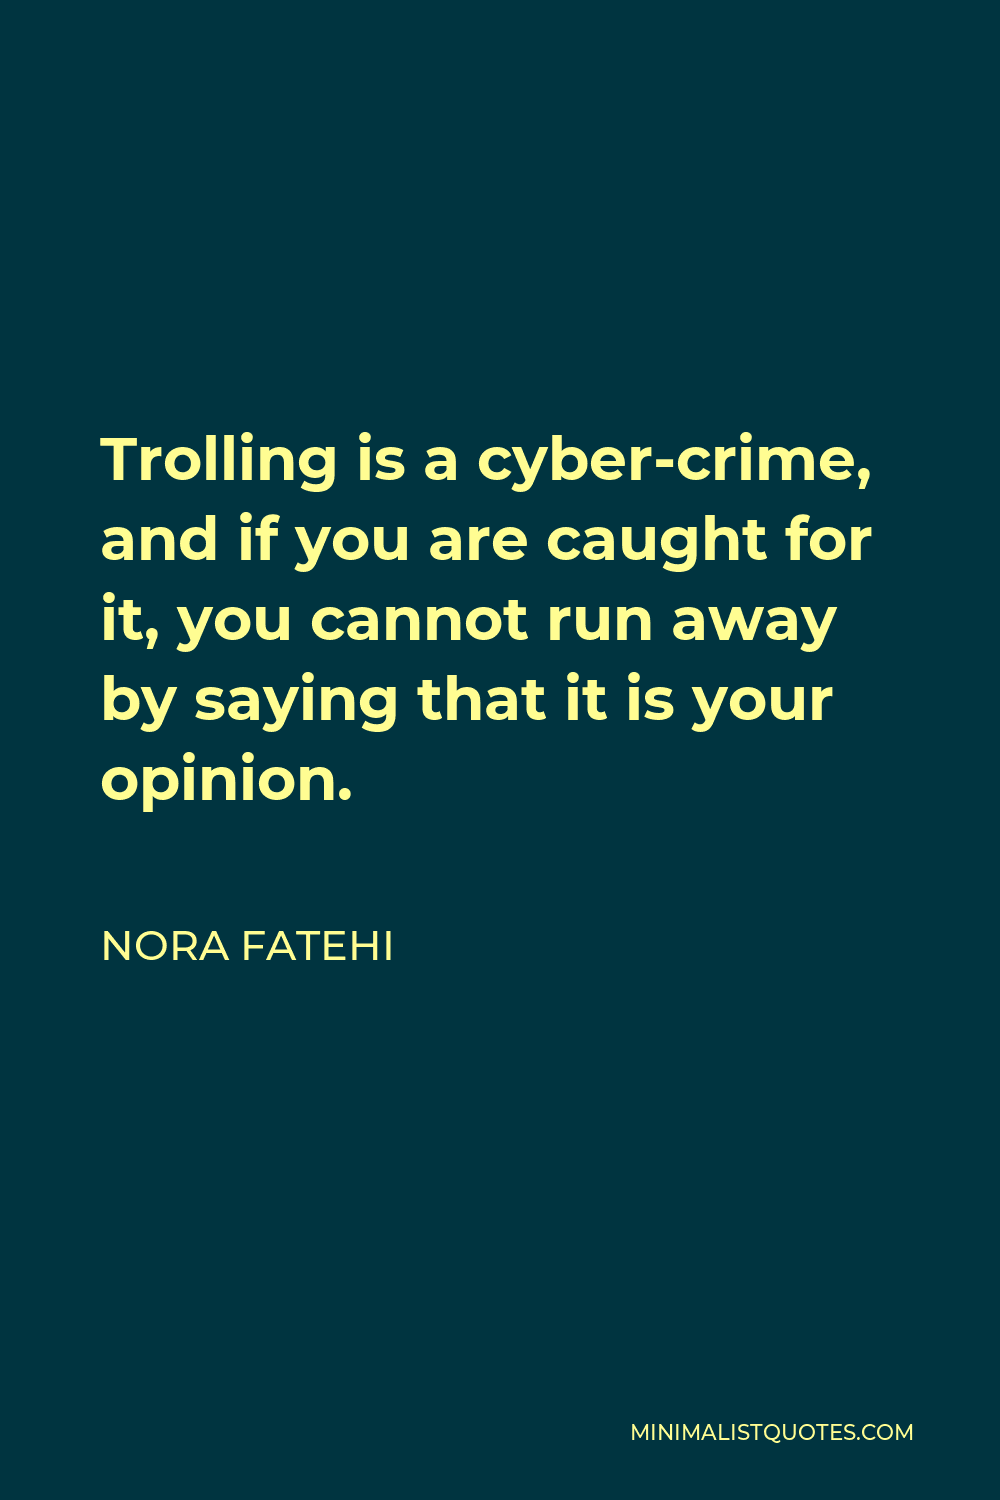 Nora Fatehi Quote - Trolling is a cyber-crime, and if you are caught for it, you cannot run away by saying that it is your opinion.